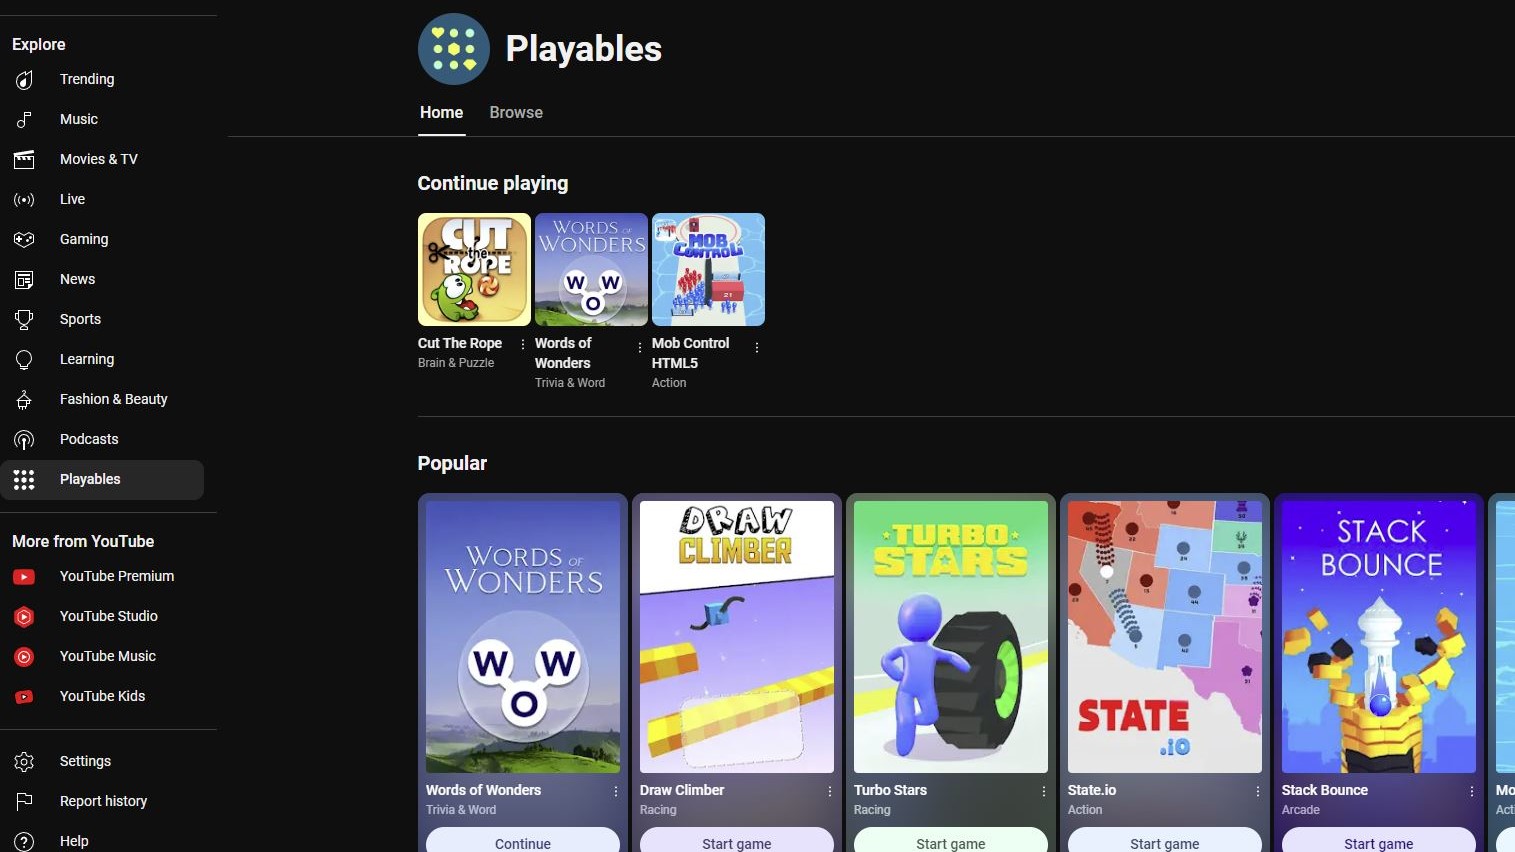 The YouTube Playables menu, showing games like Cut The Rope and Draw Climber